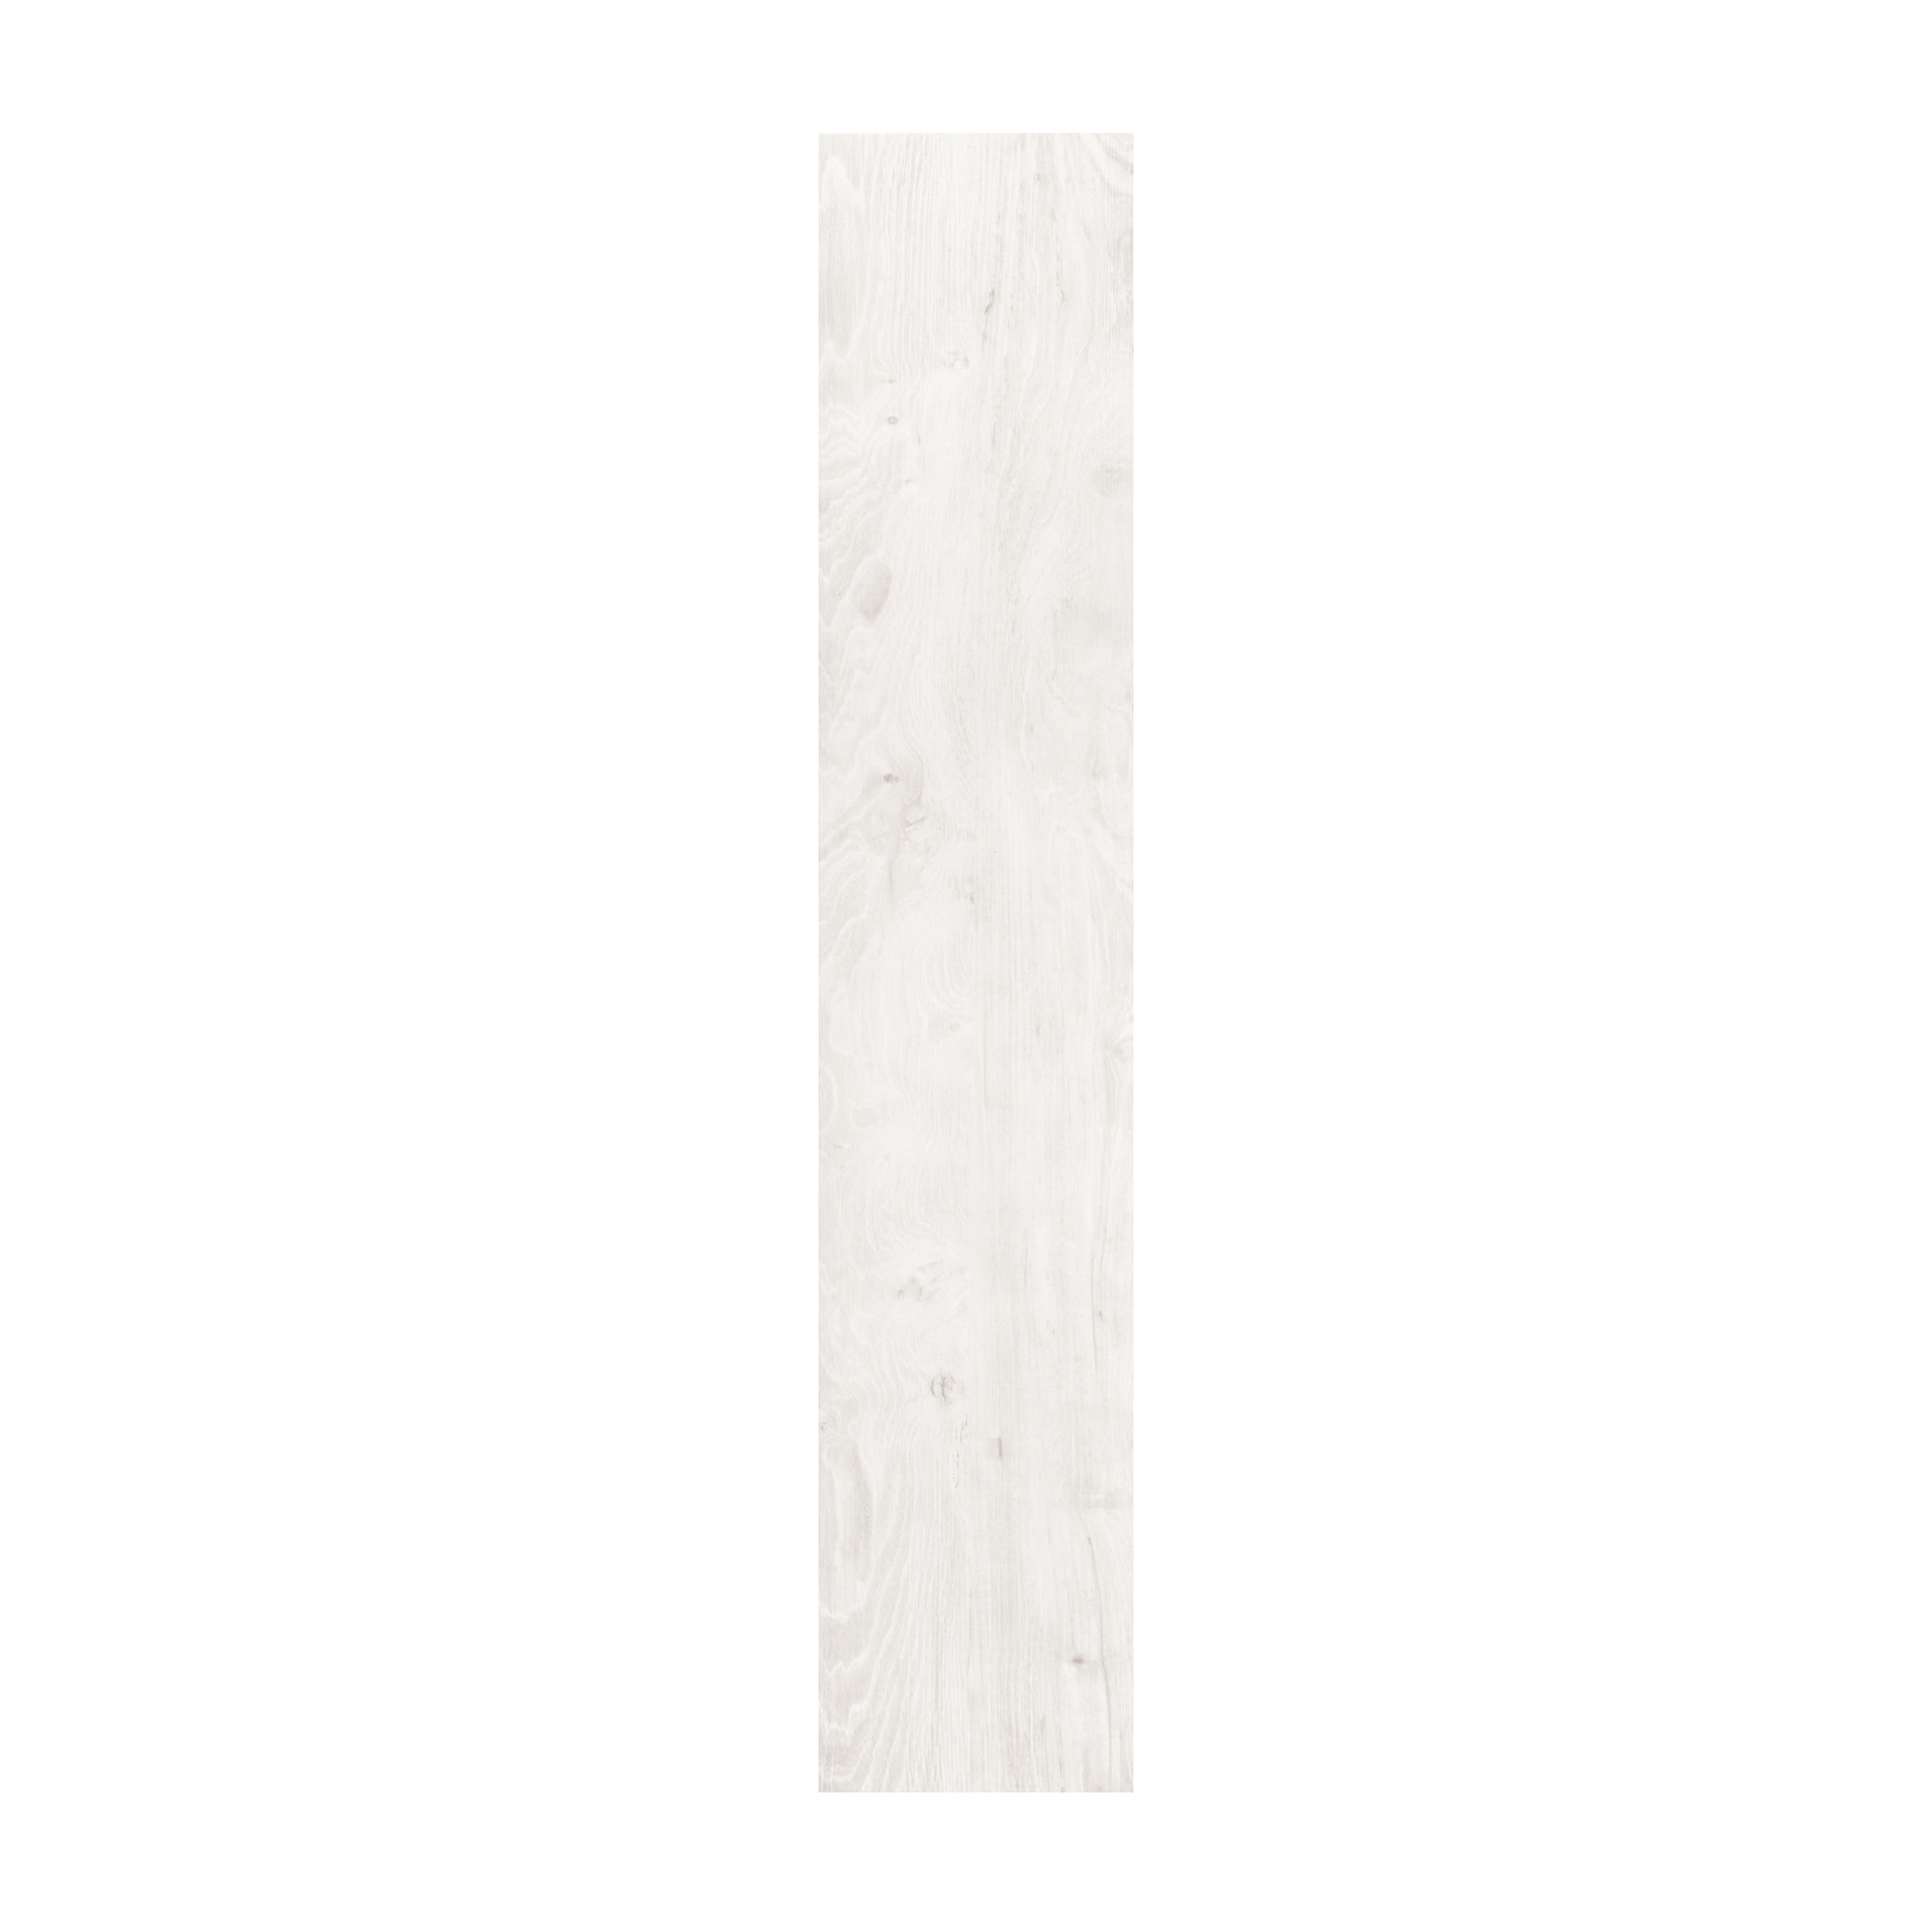 White Washed Majestic Prime Luxury Vinyl Plank - 99cent Floor Store